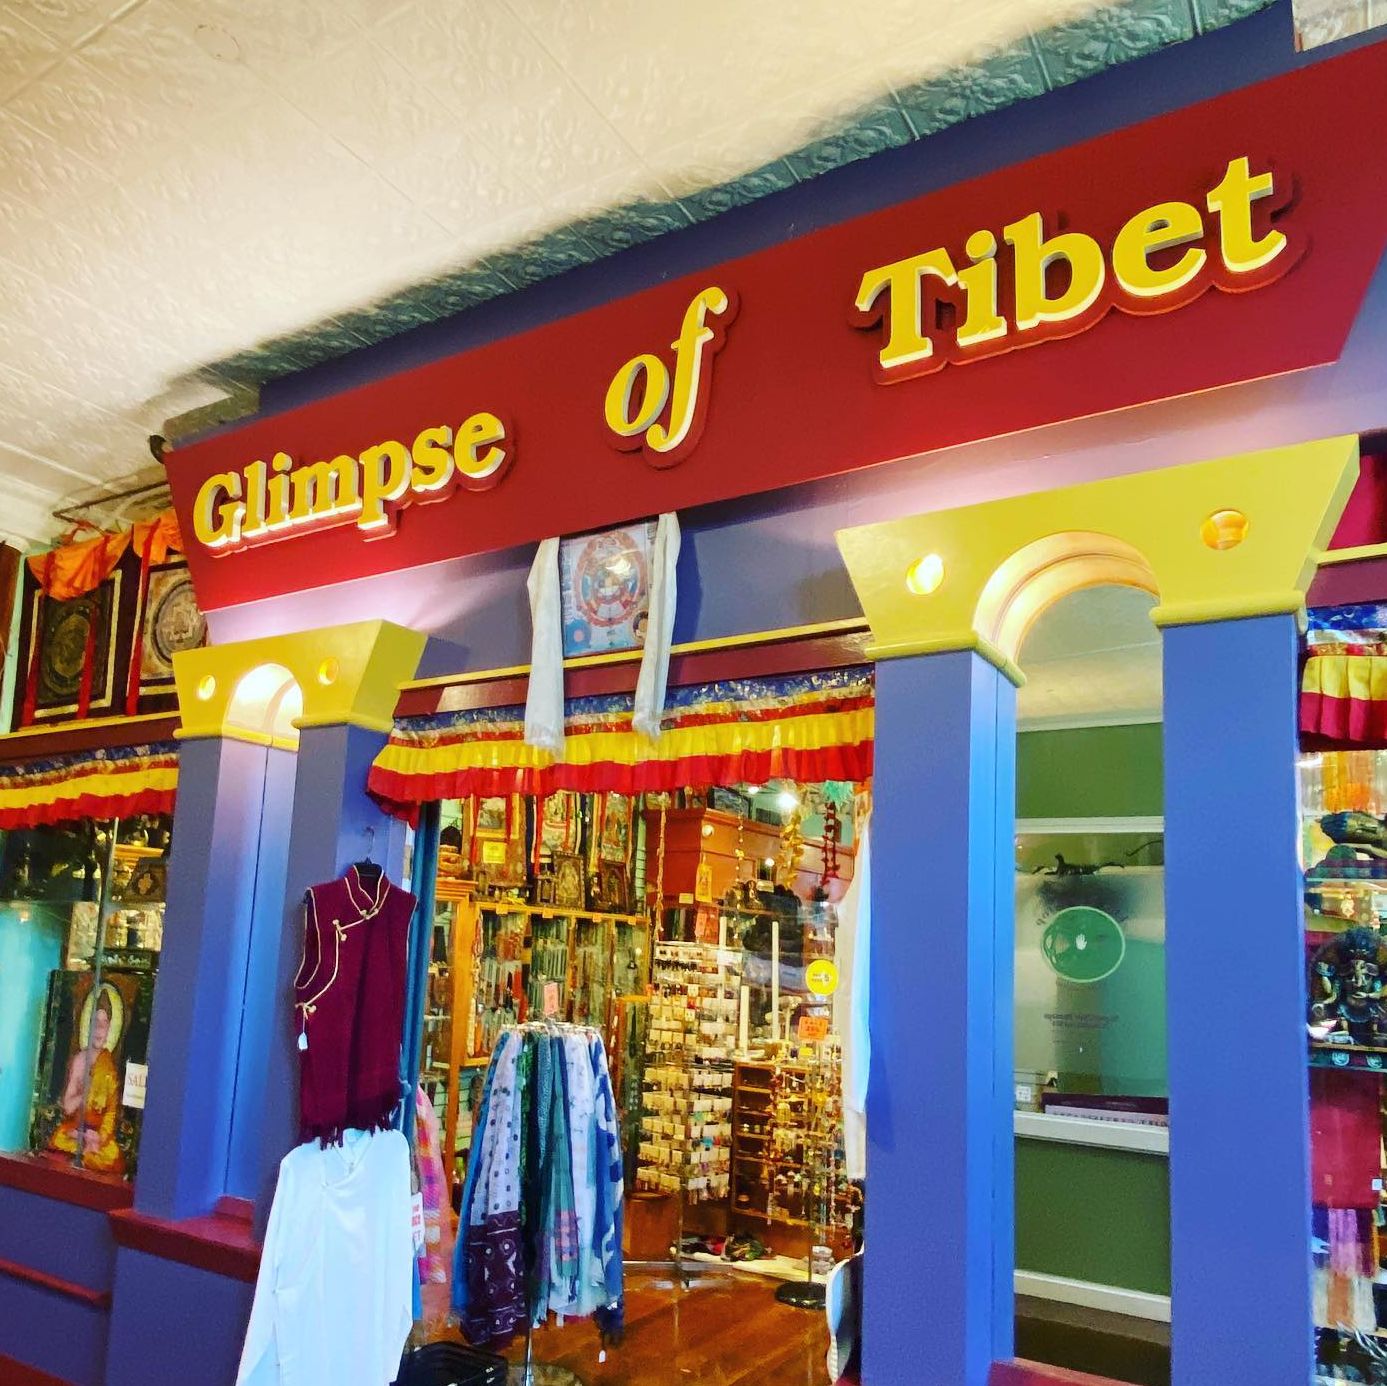 Glimpse of Tibet offers beautiful and unique items, from clothing to accessories.